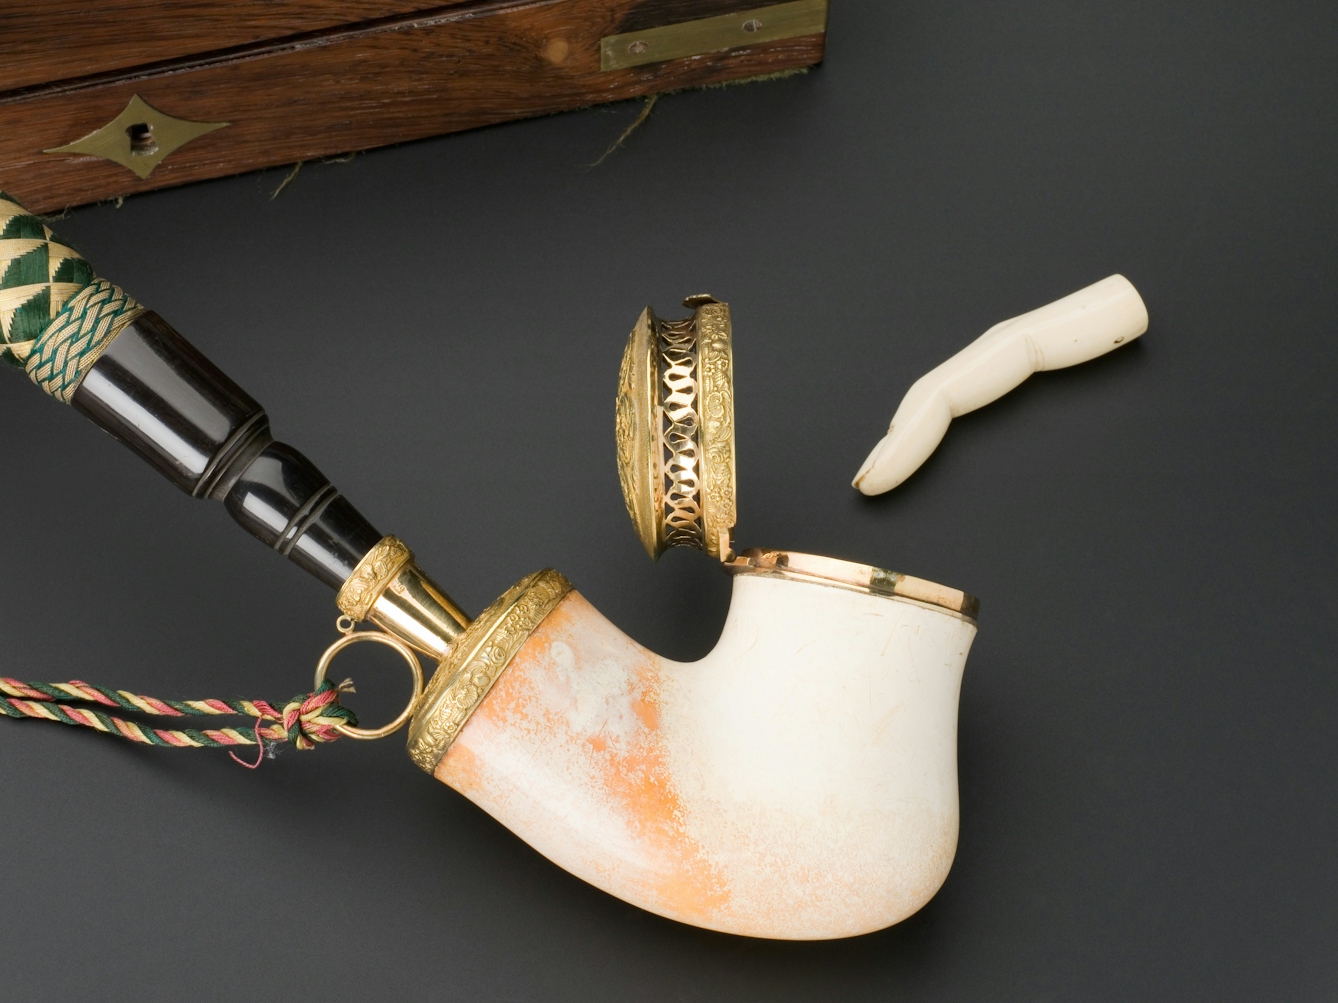 A large meerschaum pipe bowl and an ivory tamper in the shape of a finger (to pack tobacco into the pipe bowl).